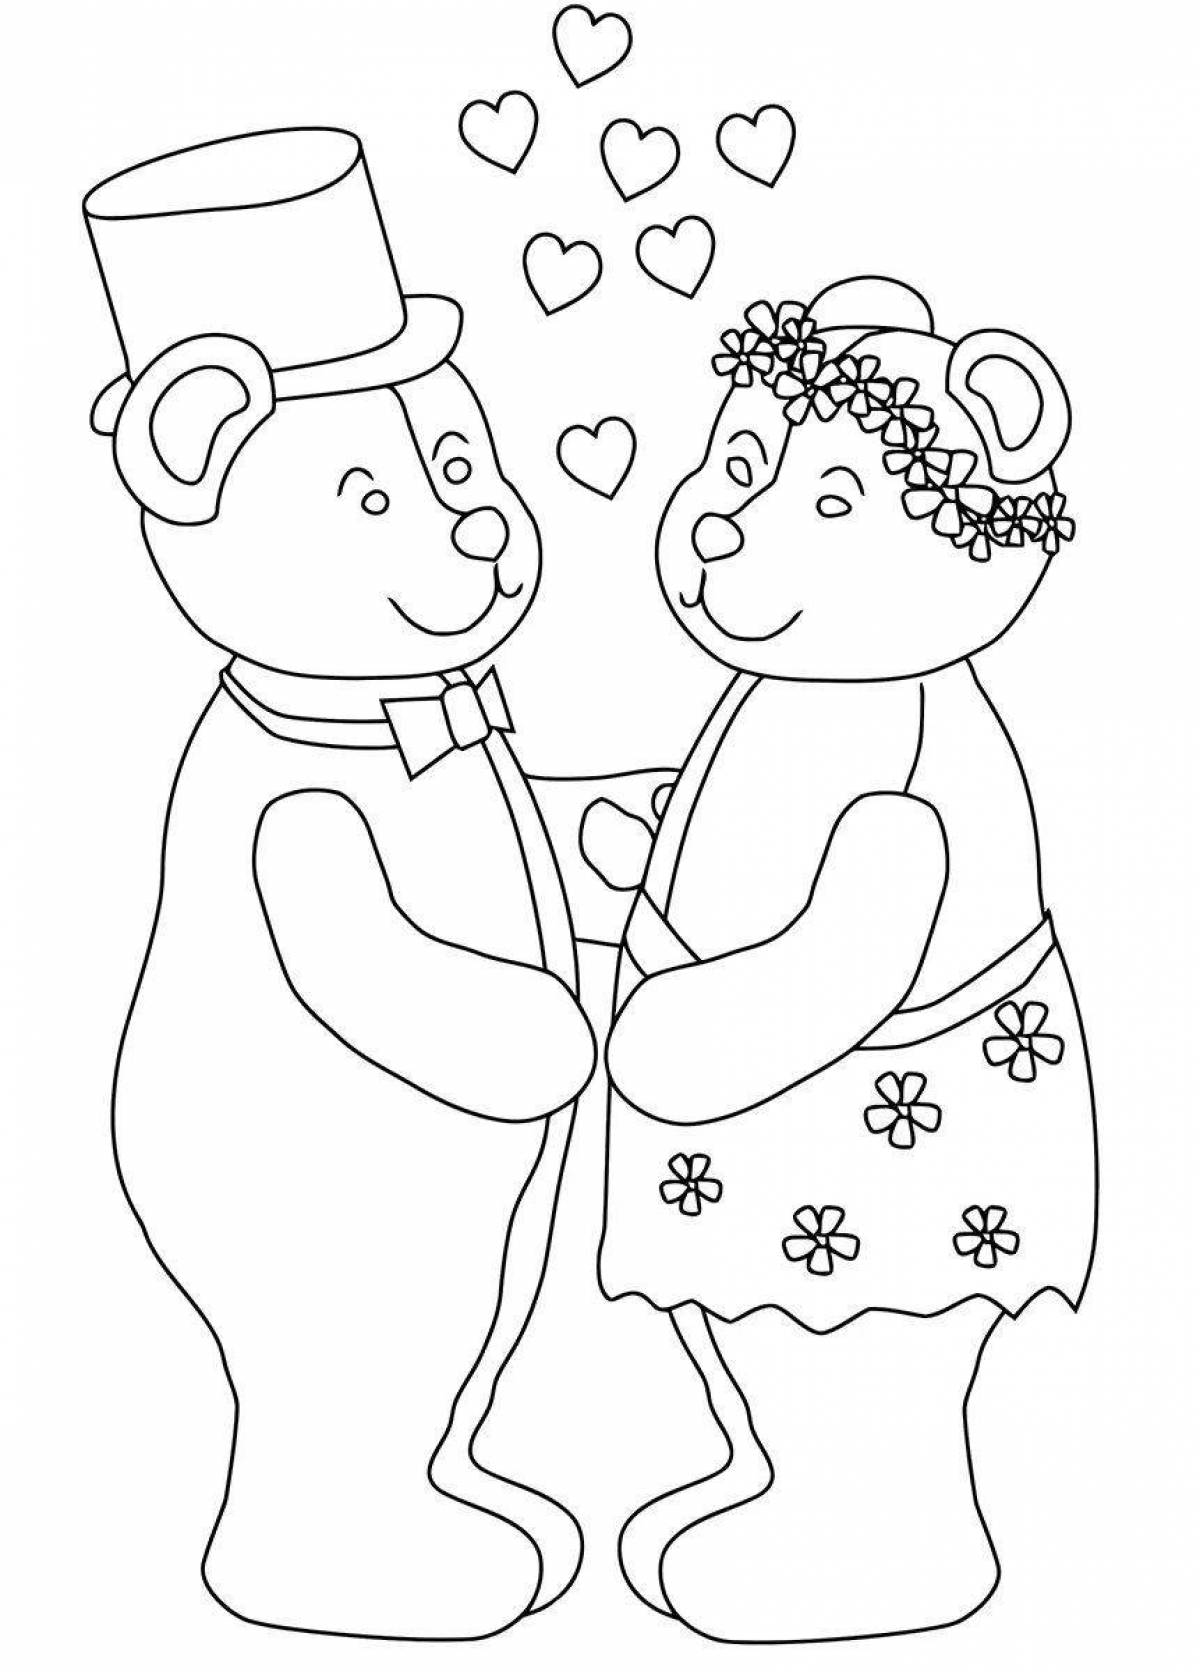 Exotic wedding coloring book for kids